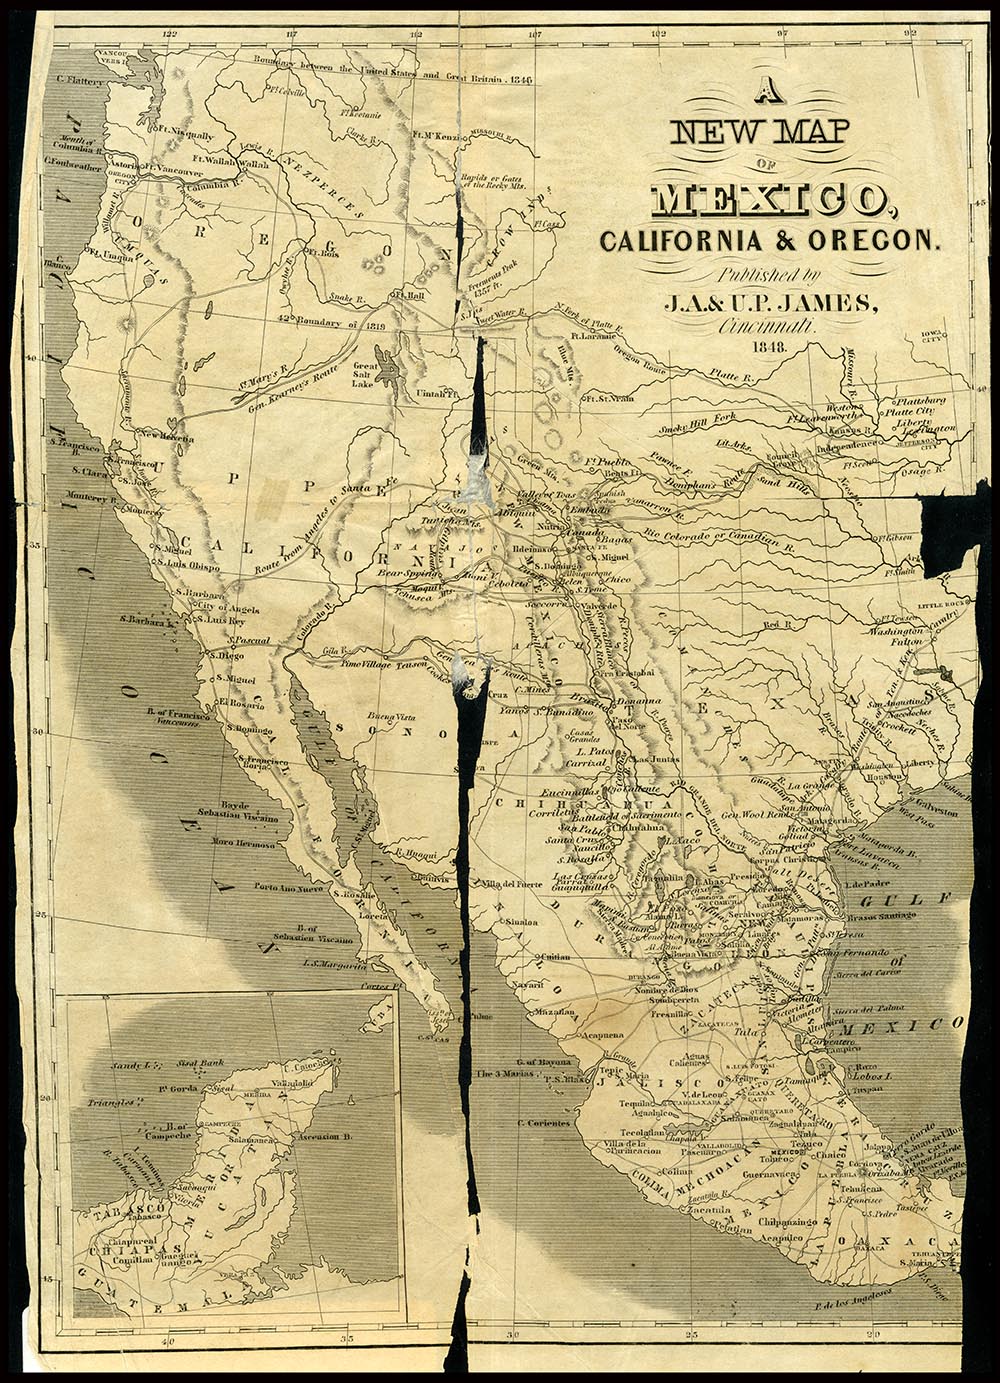 An 1848 map of Mexico, California, and Oregon, which represents much of the territory taken by the United States in the war with Mexico